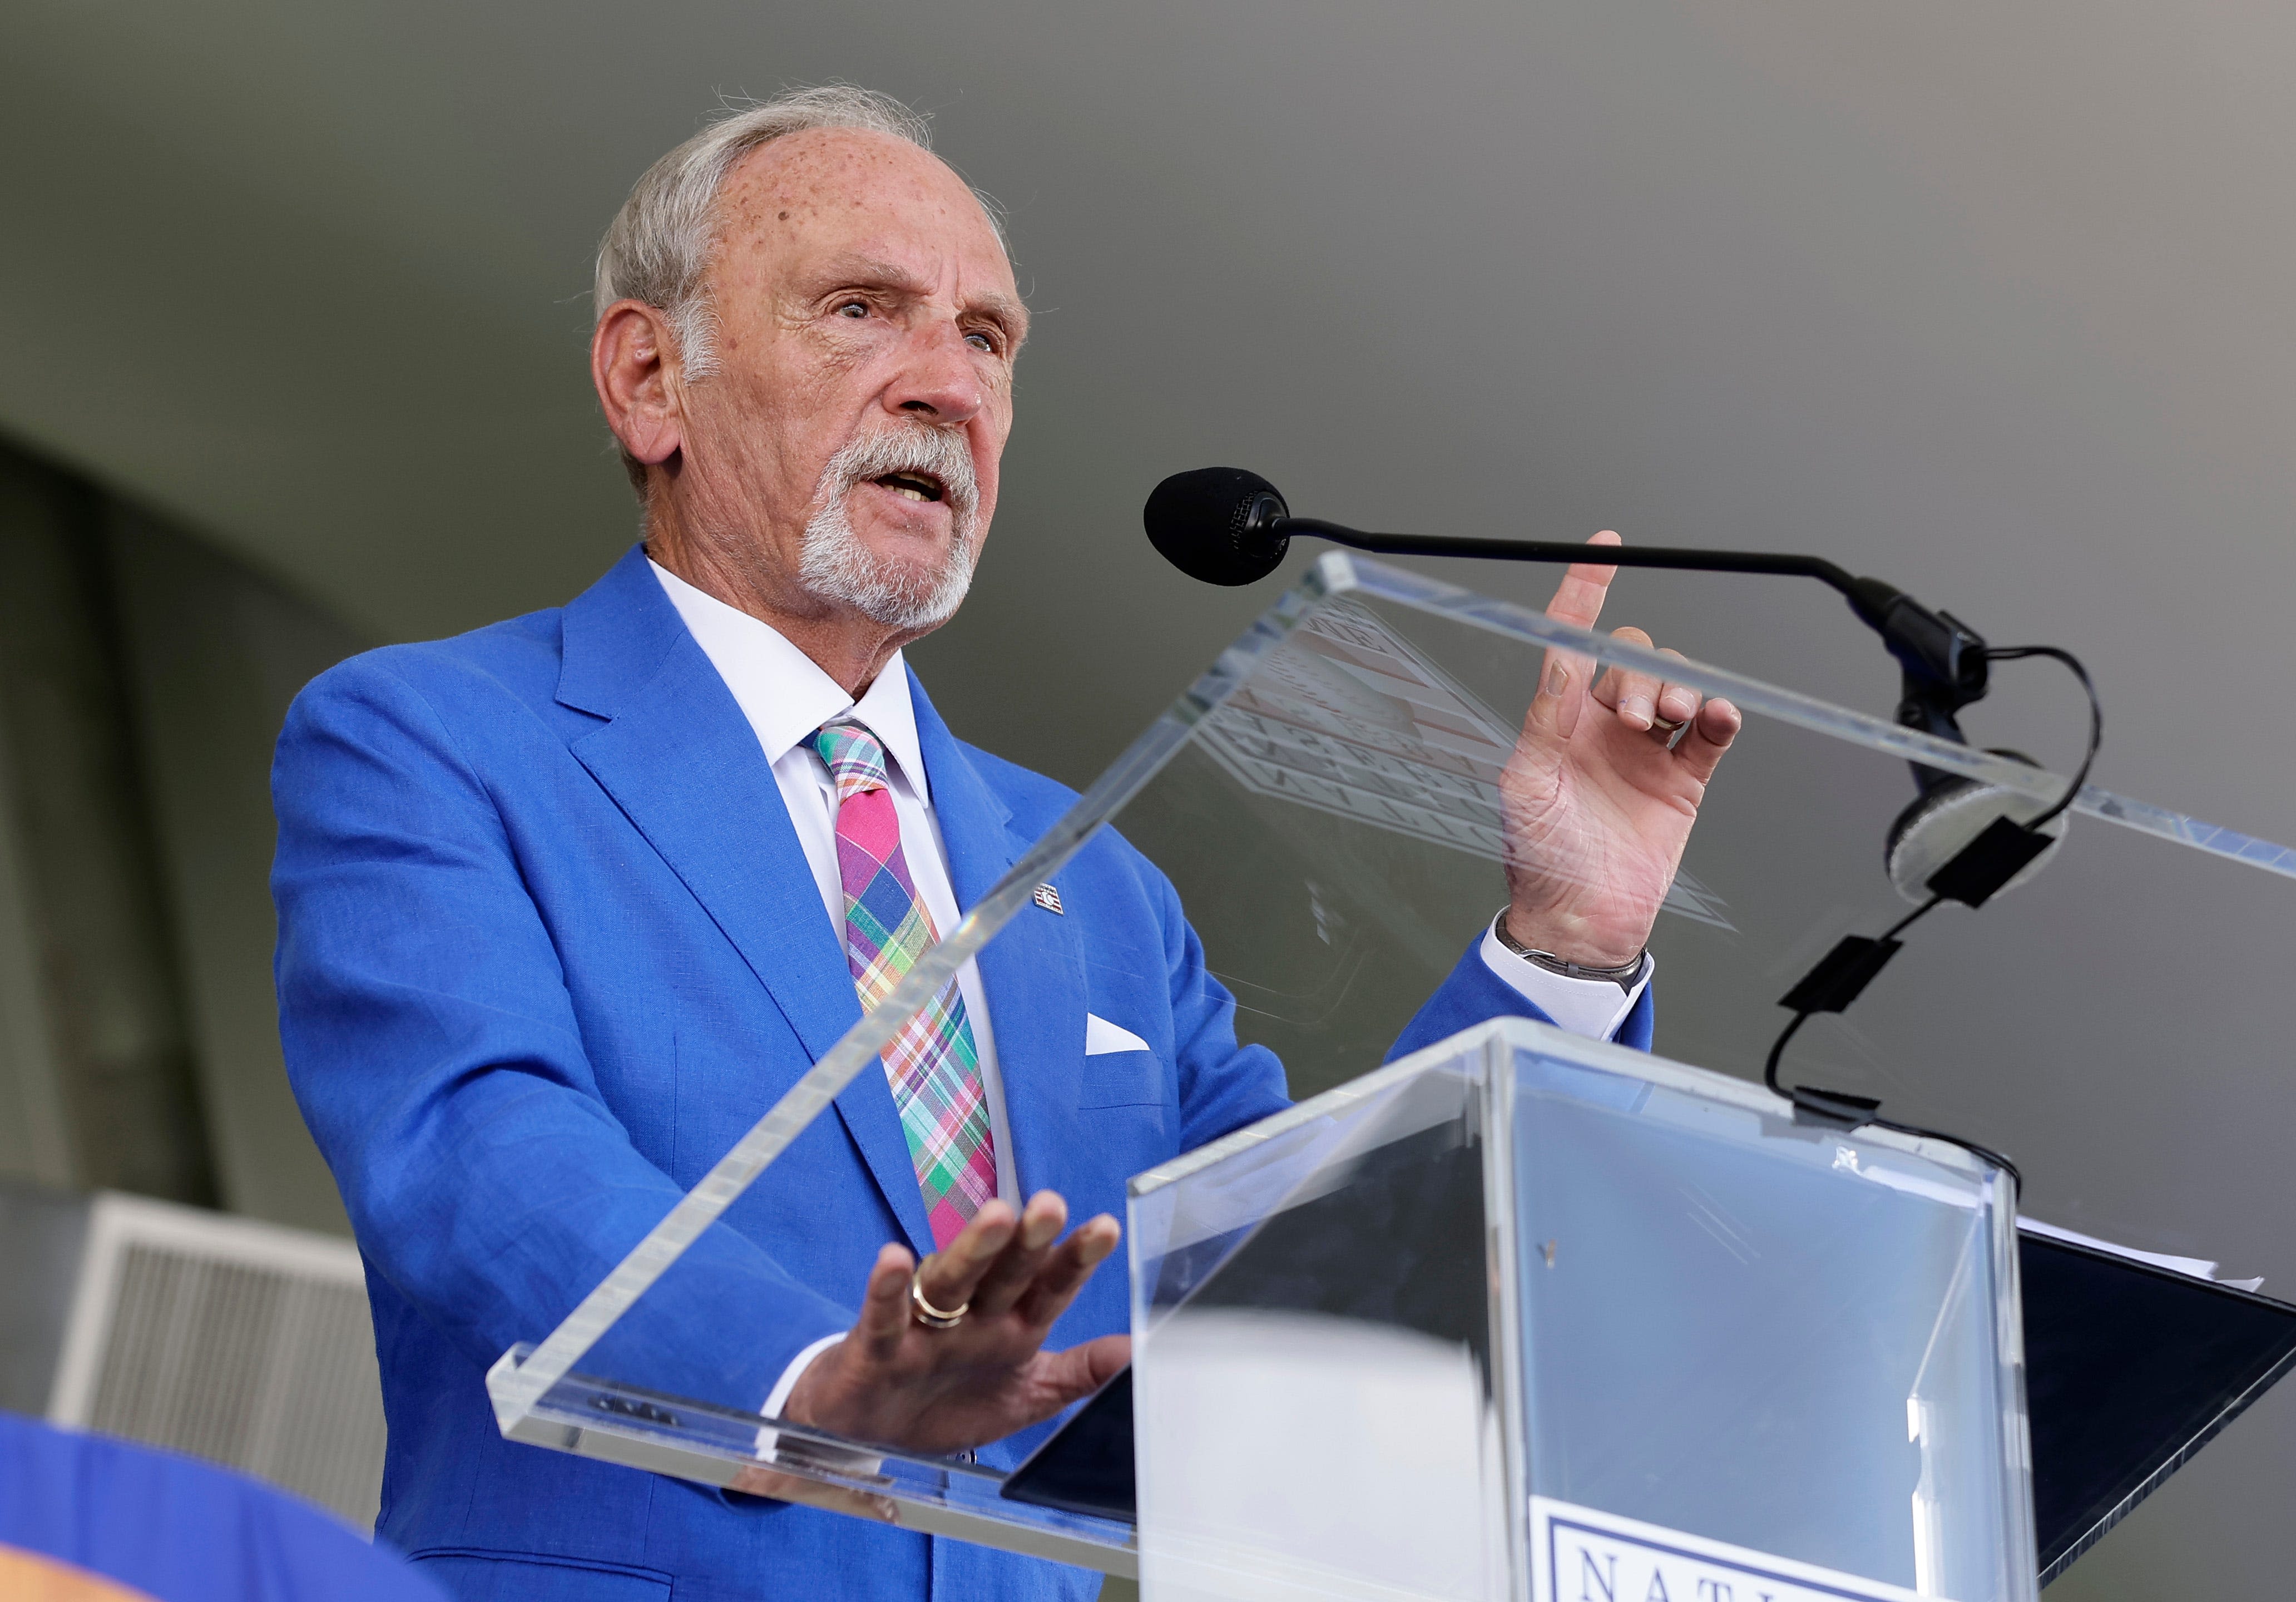 Behind the Baseball Hall of Fame scenes: A party for Jim Leyland reveals something special